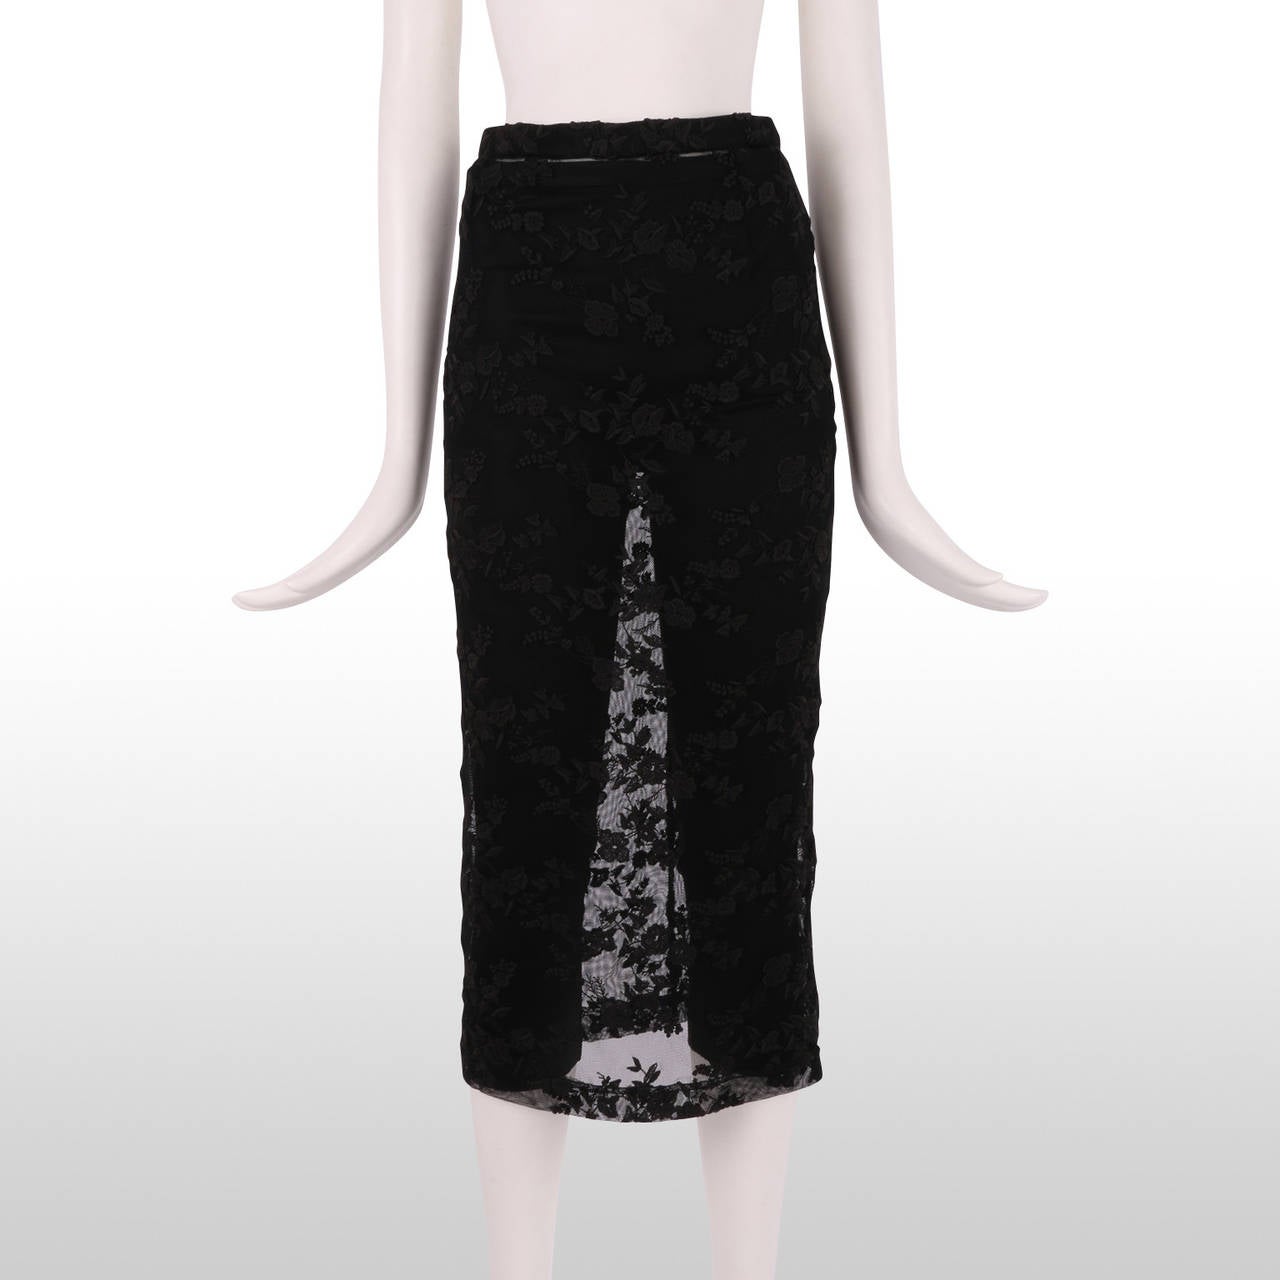 Women's Dolce & Gabbana Black Pedal Pusher Leggings with Lace Skirt Overlay For Sale